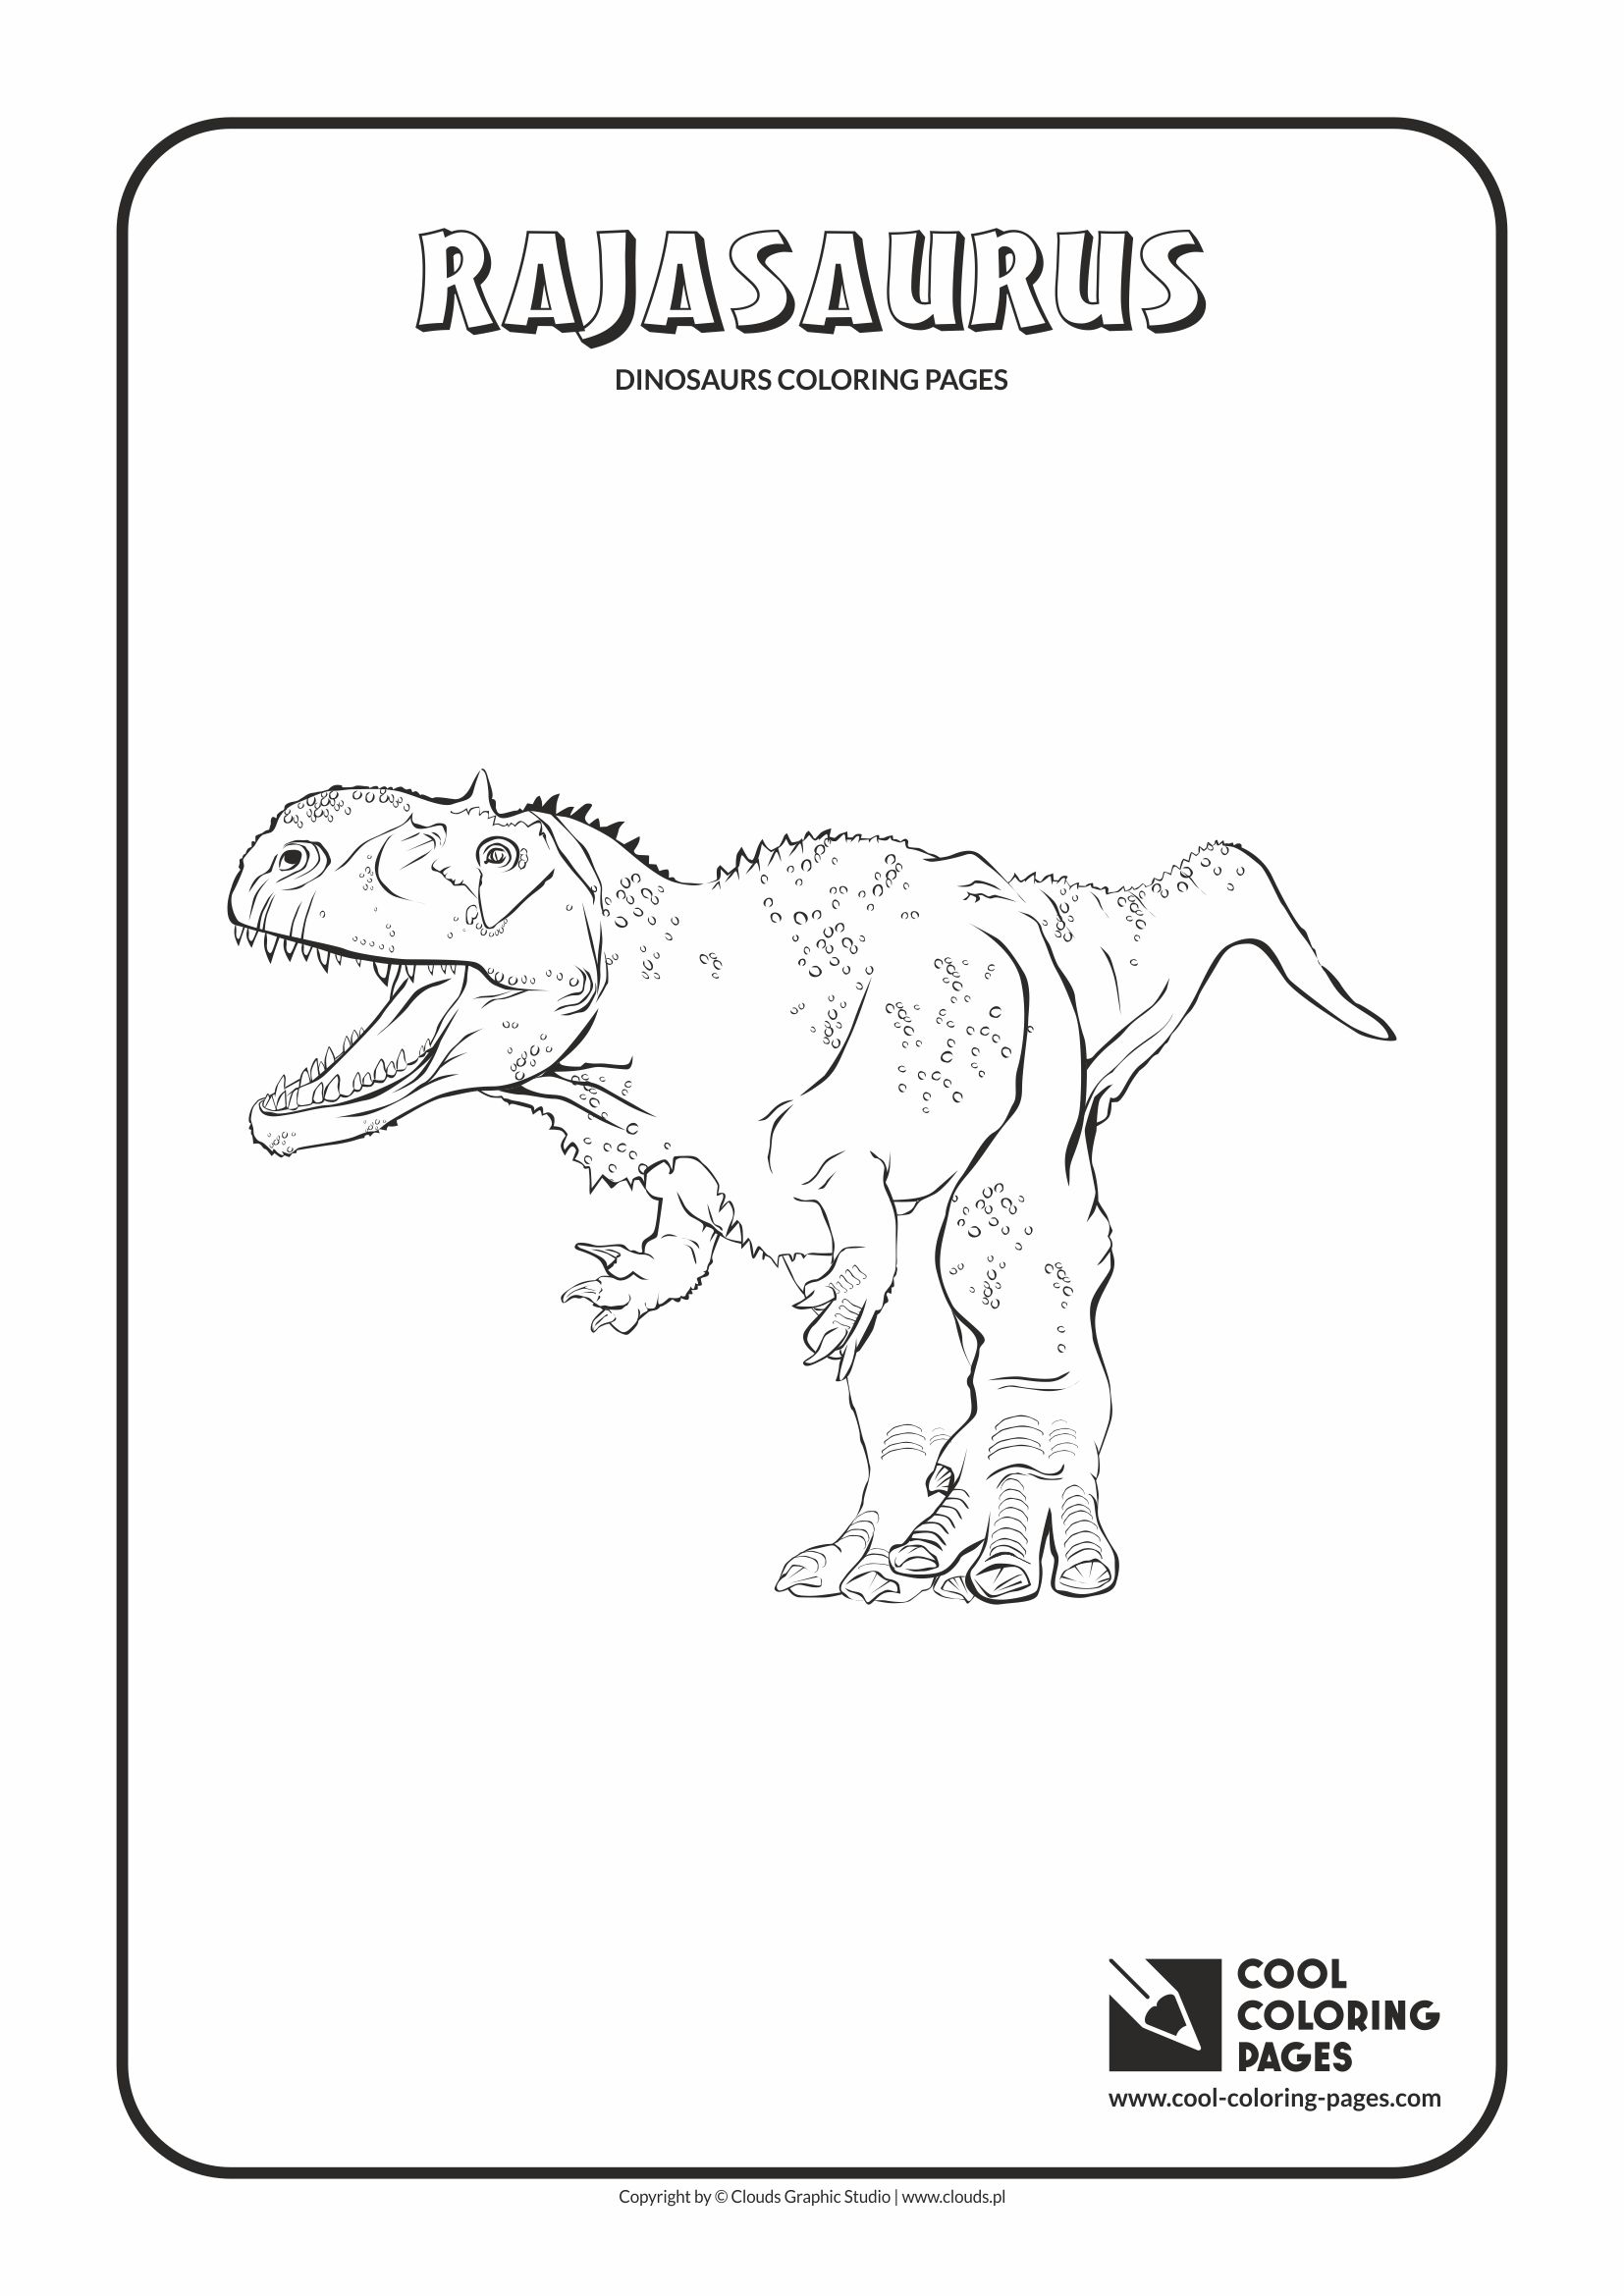 Cool Coloring Pages - Animals / Rajasaurus / Coloring page with rajasaurus